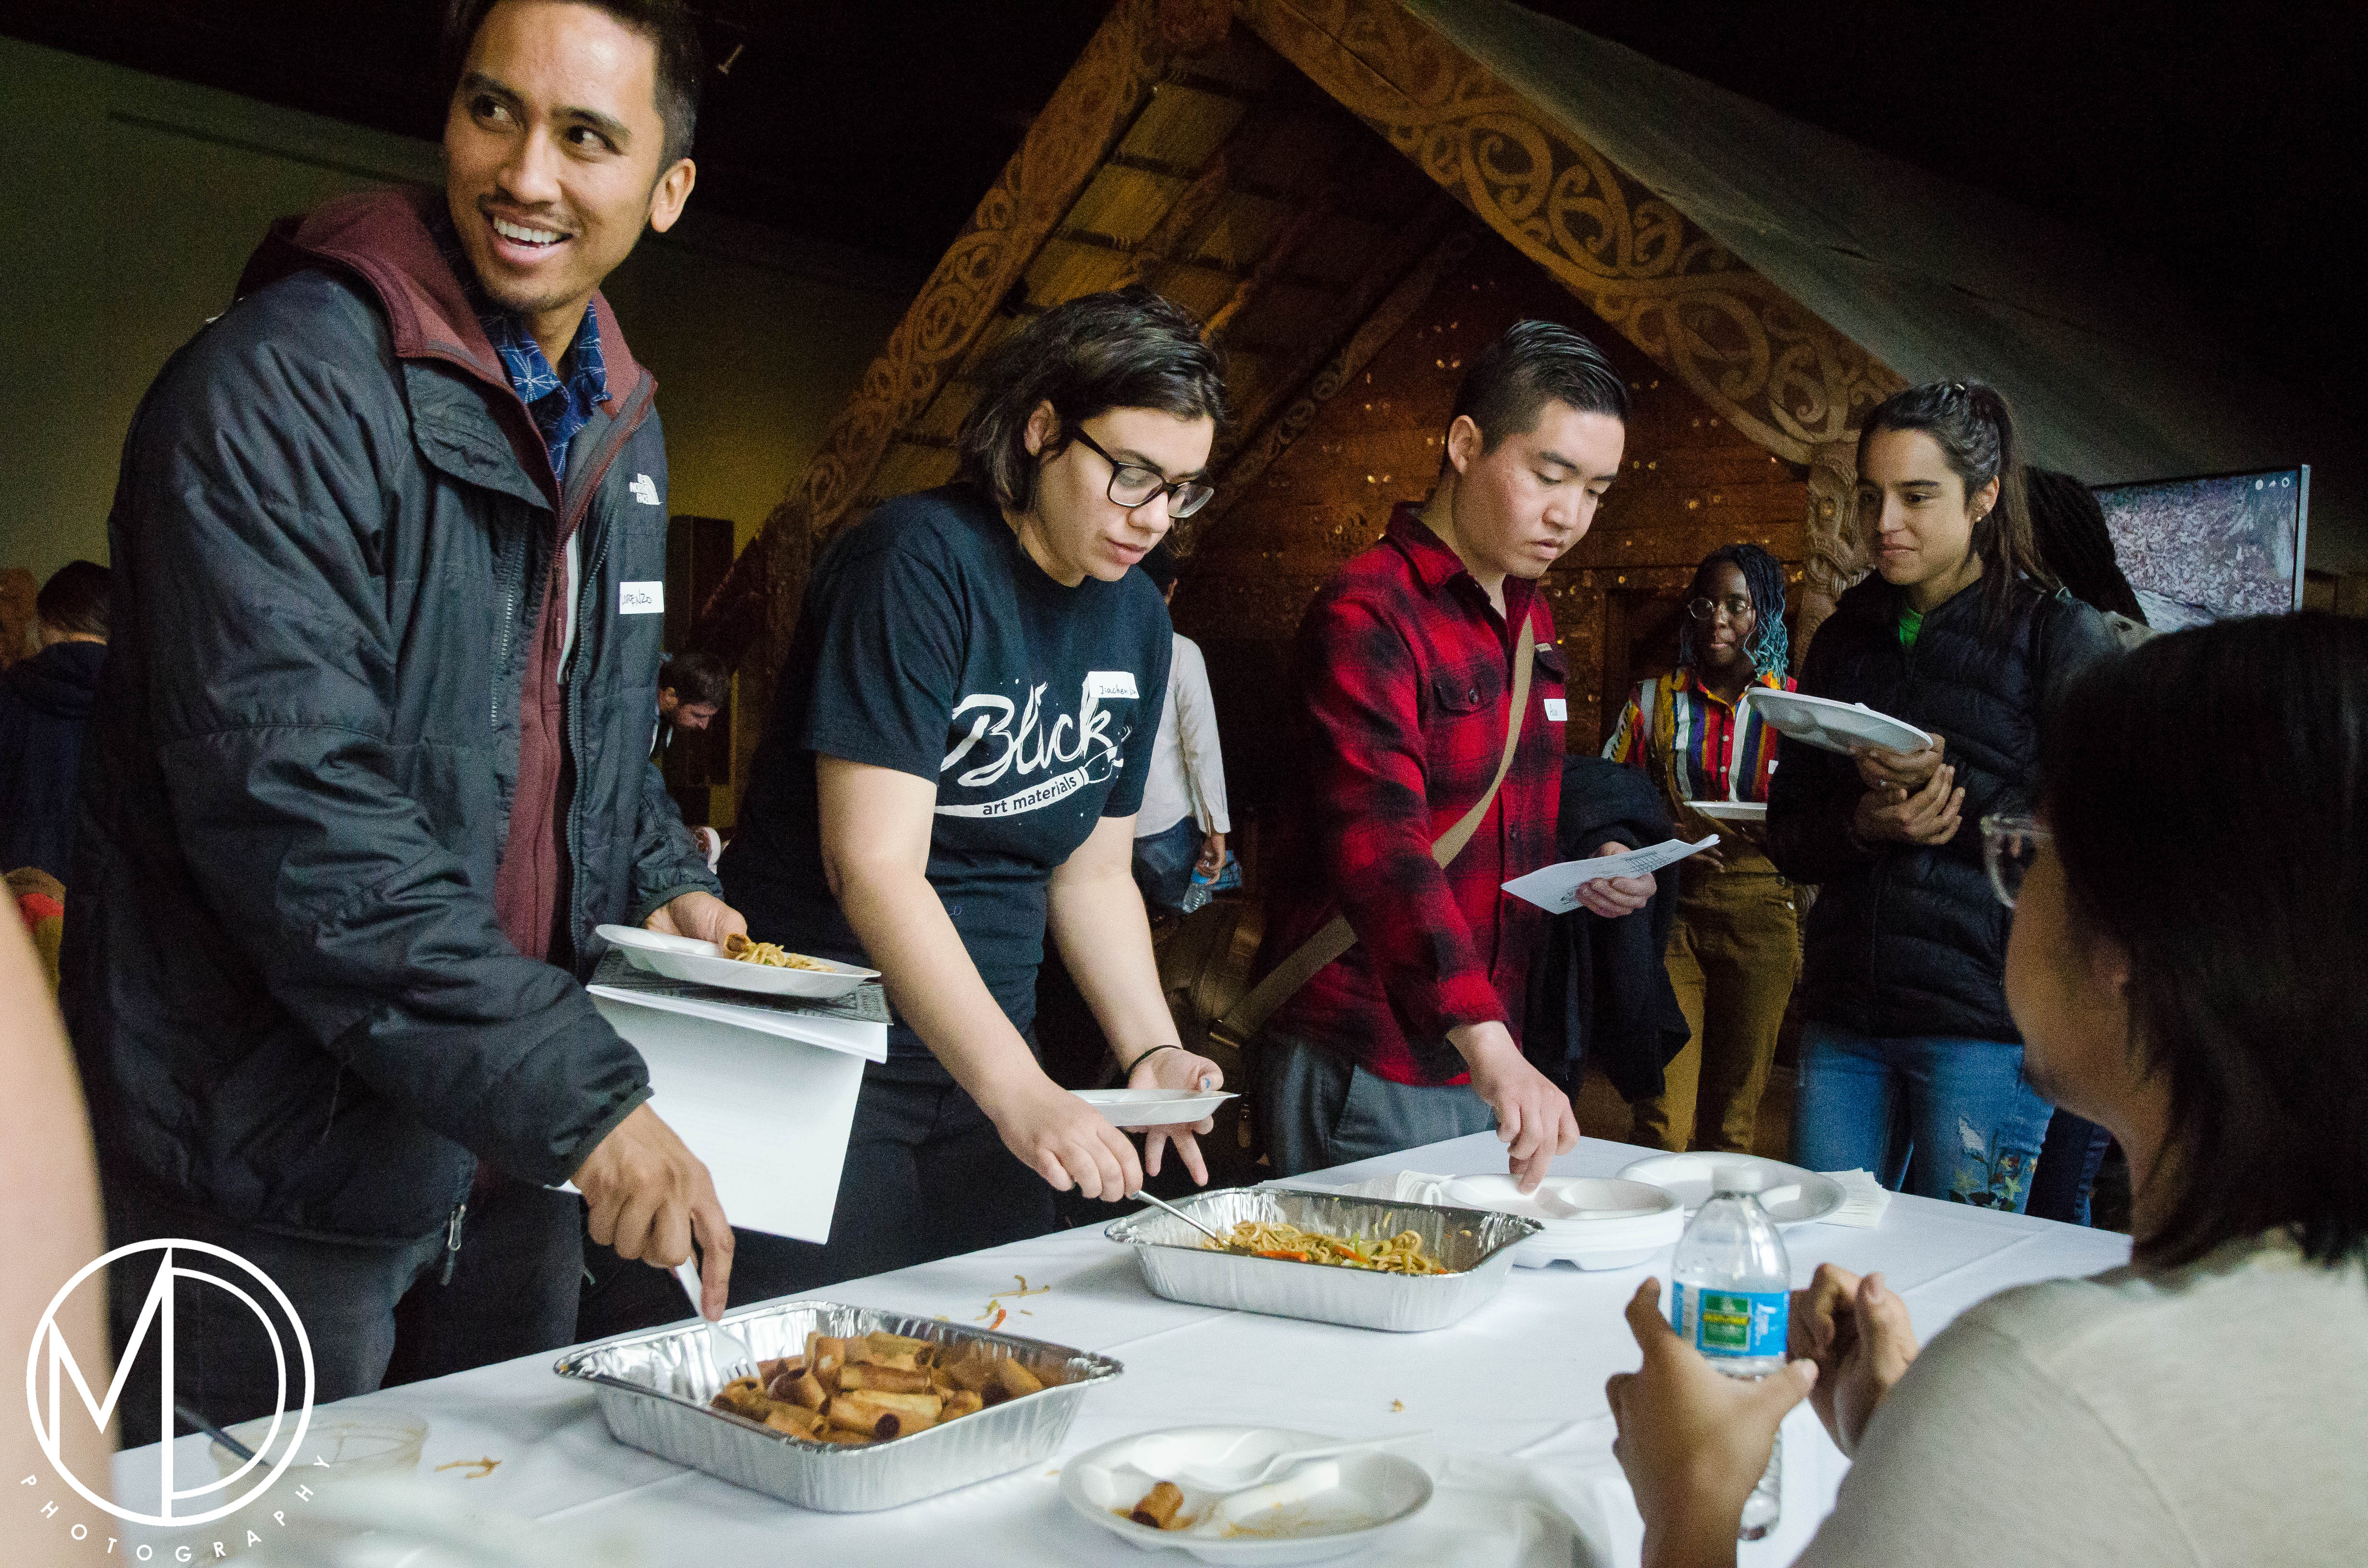 Guests trying out lumpia (Filipino egg rolls). (c) Field Museum of Natural History - CC BY-NC 4.0